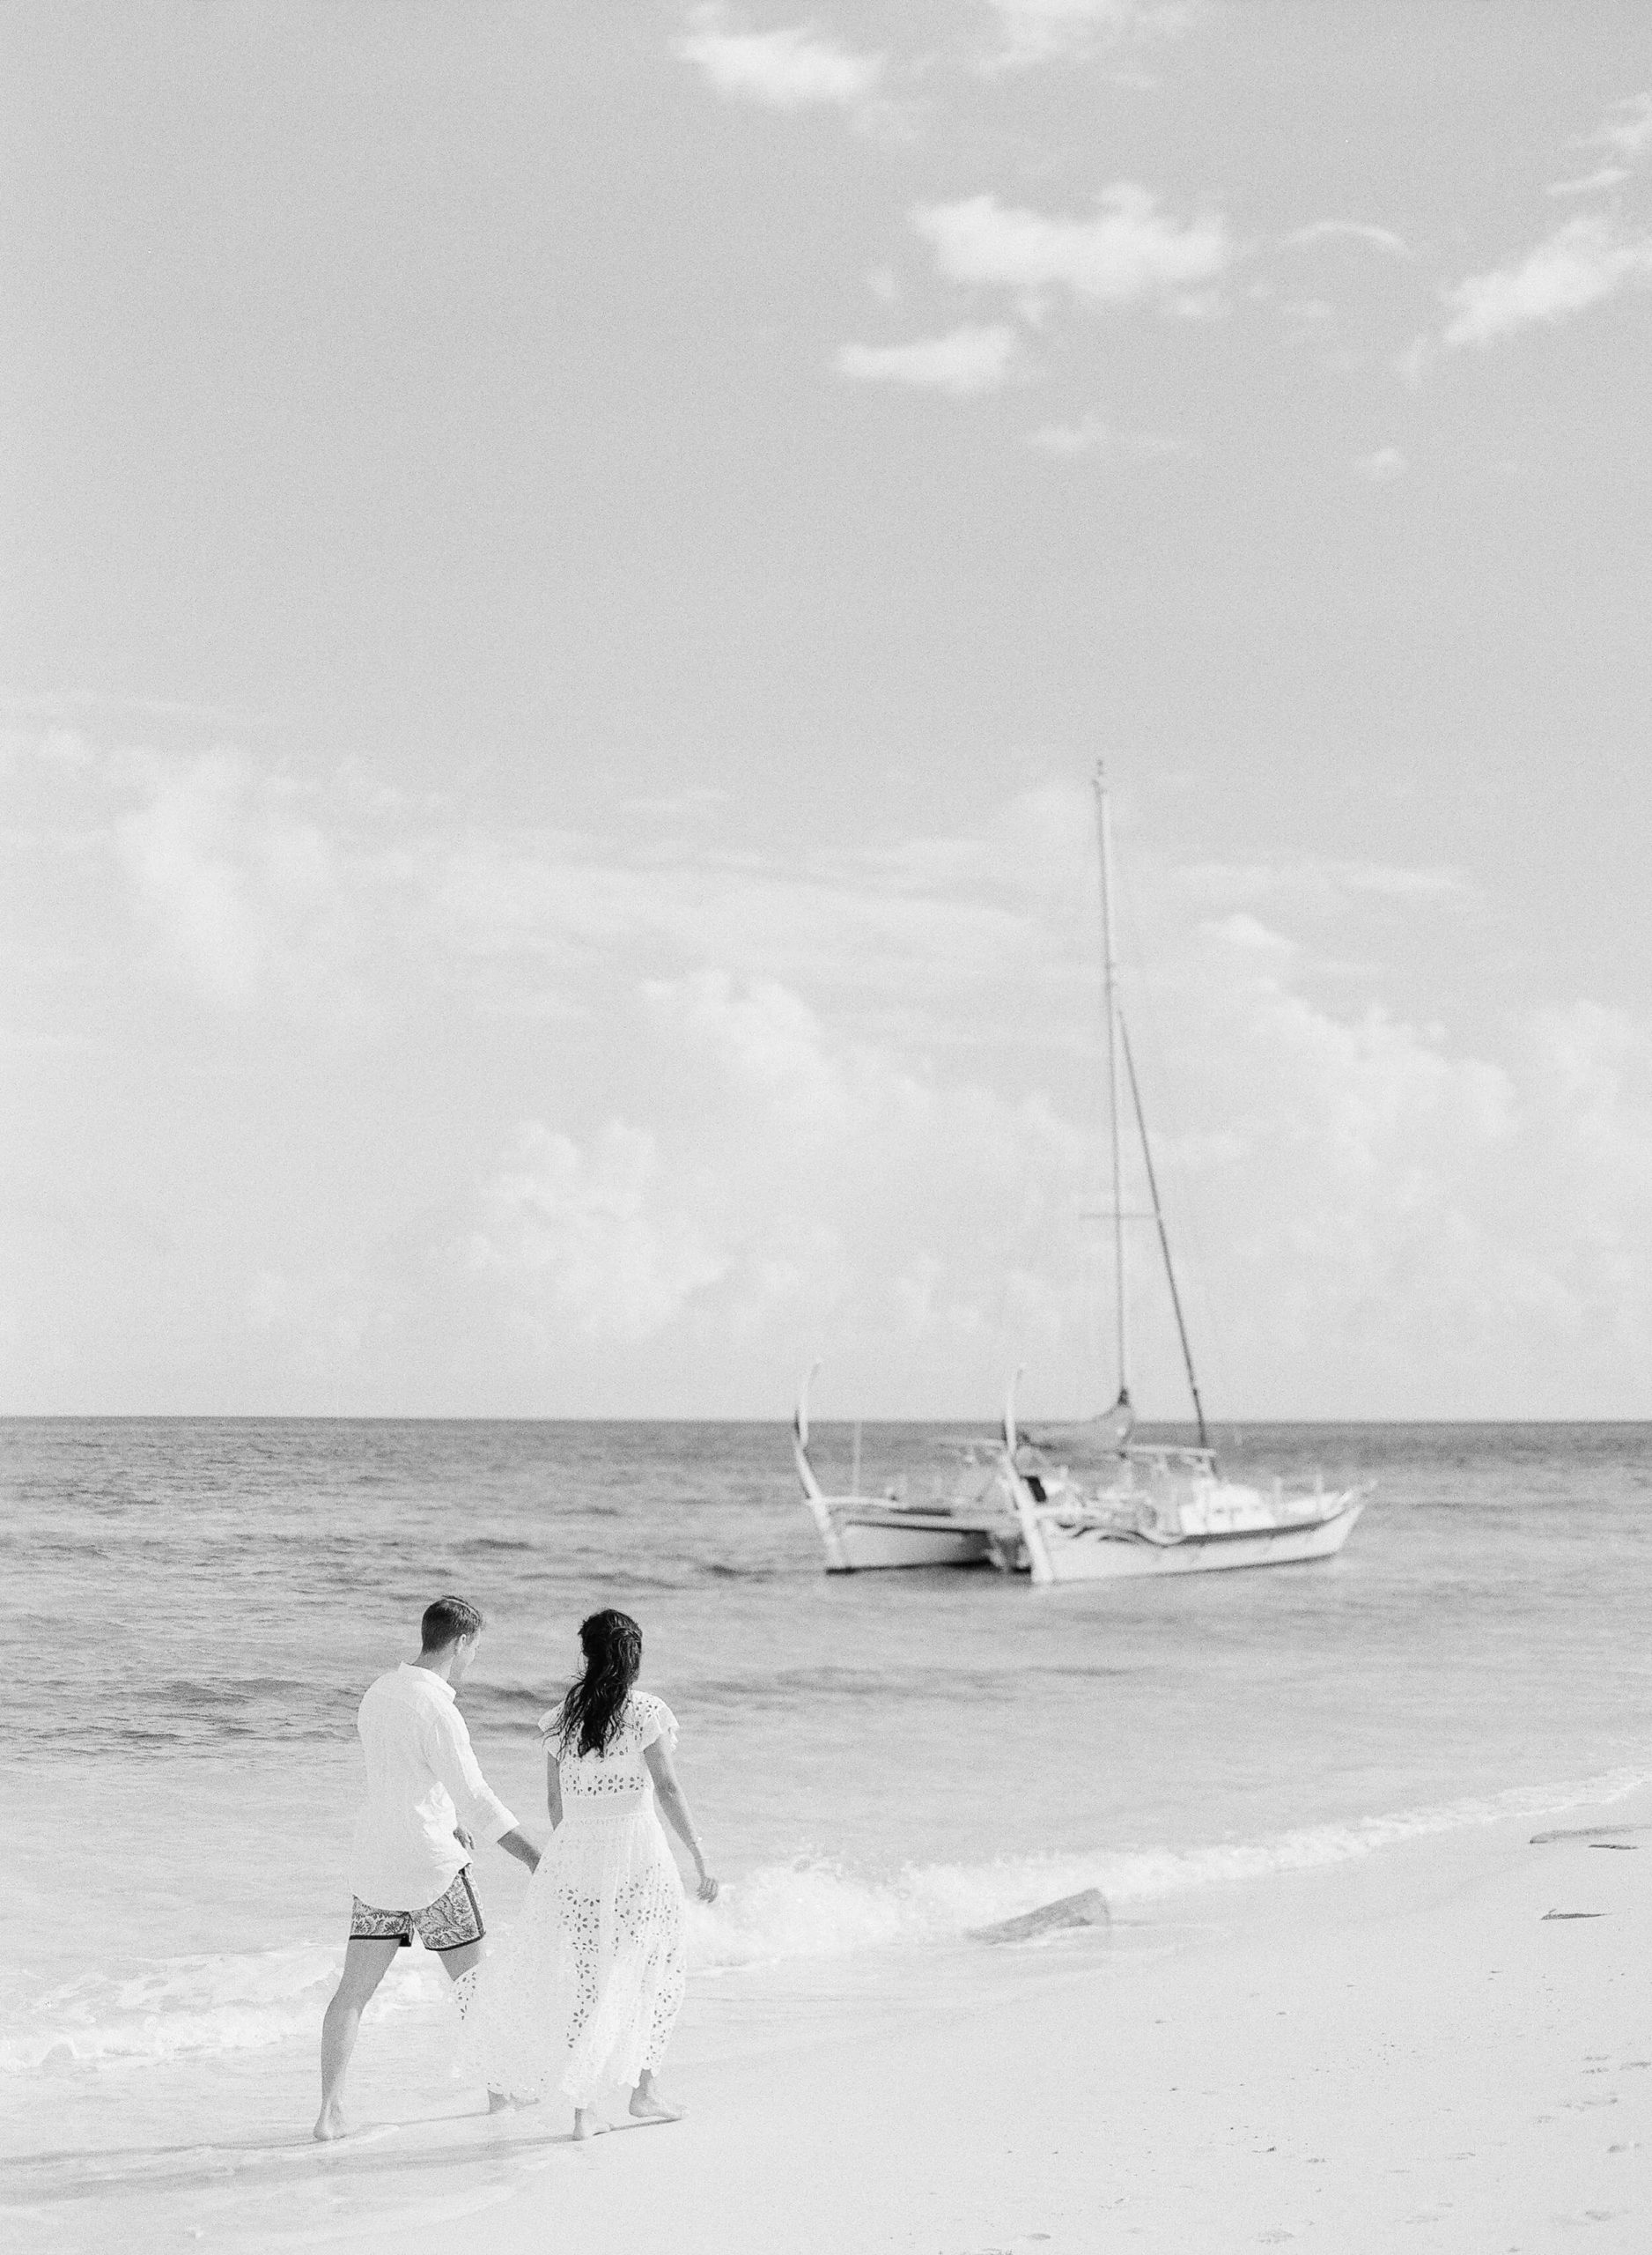 Liz and Dave walking along the beach with a boat in the background